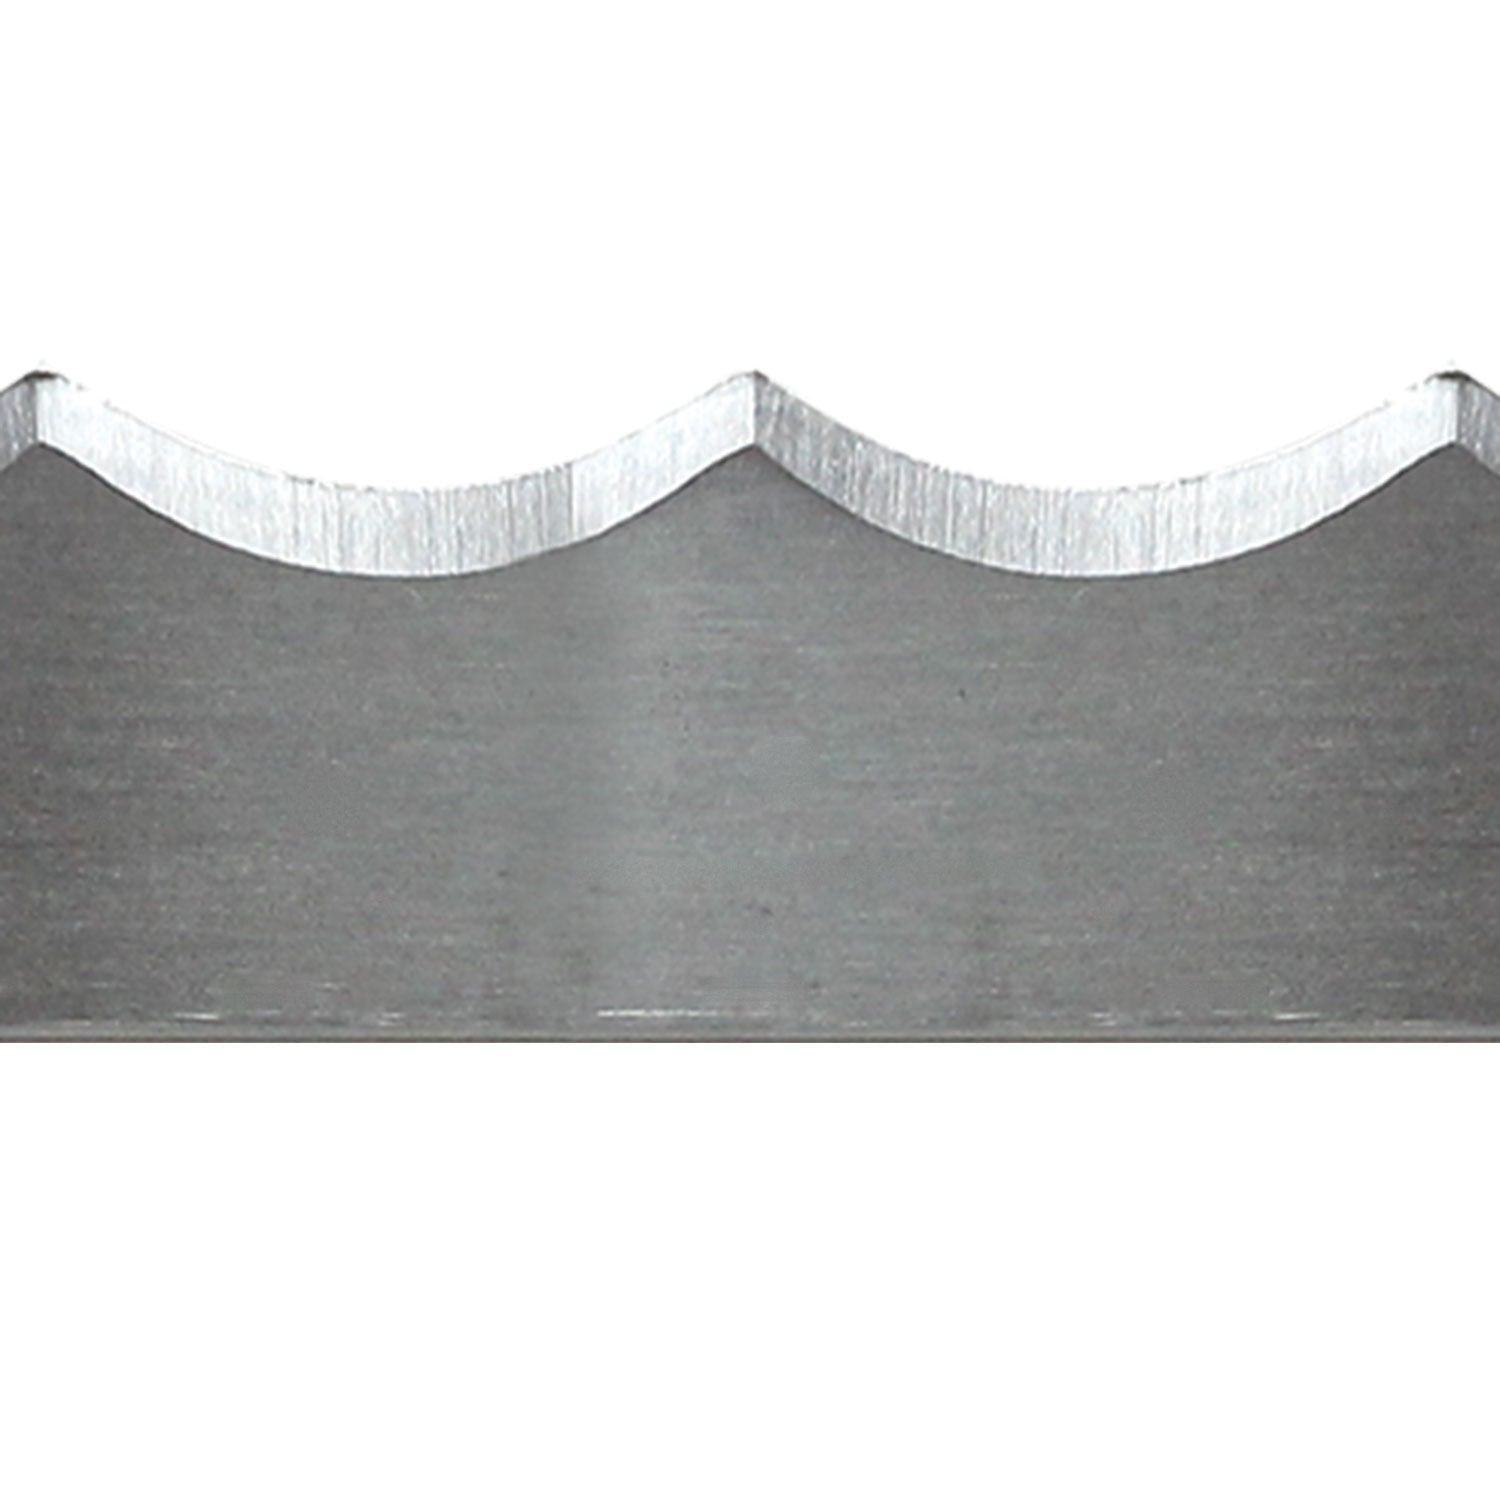 Meat Band Saw Blade - Scallop Edge - 124 in. x 5/8 in. x .022 in. - Pack of 4